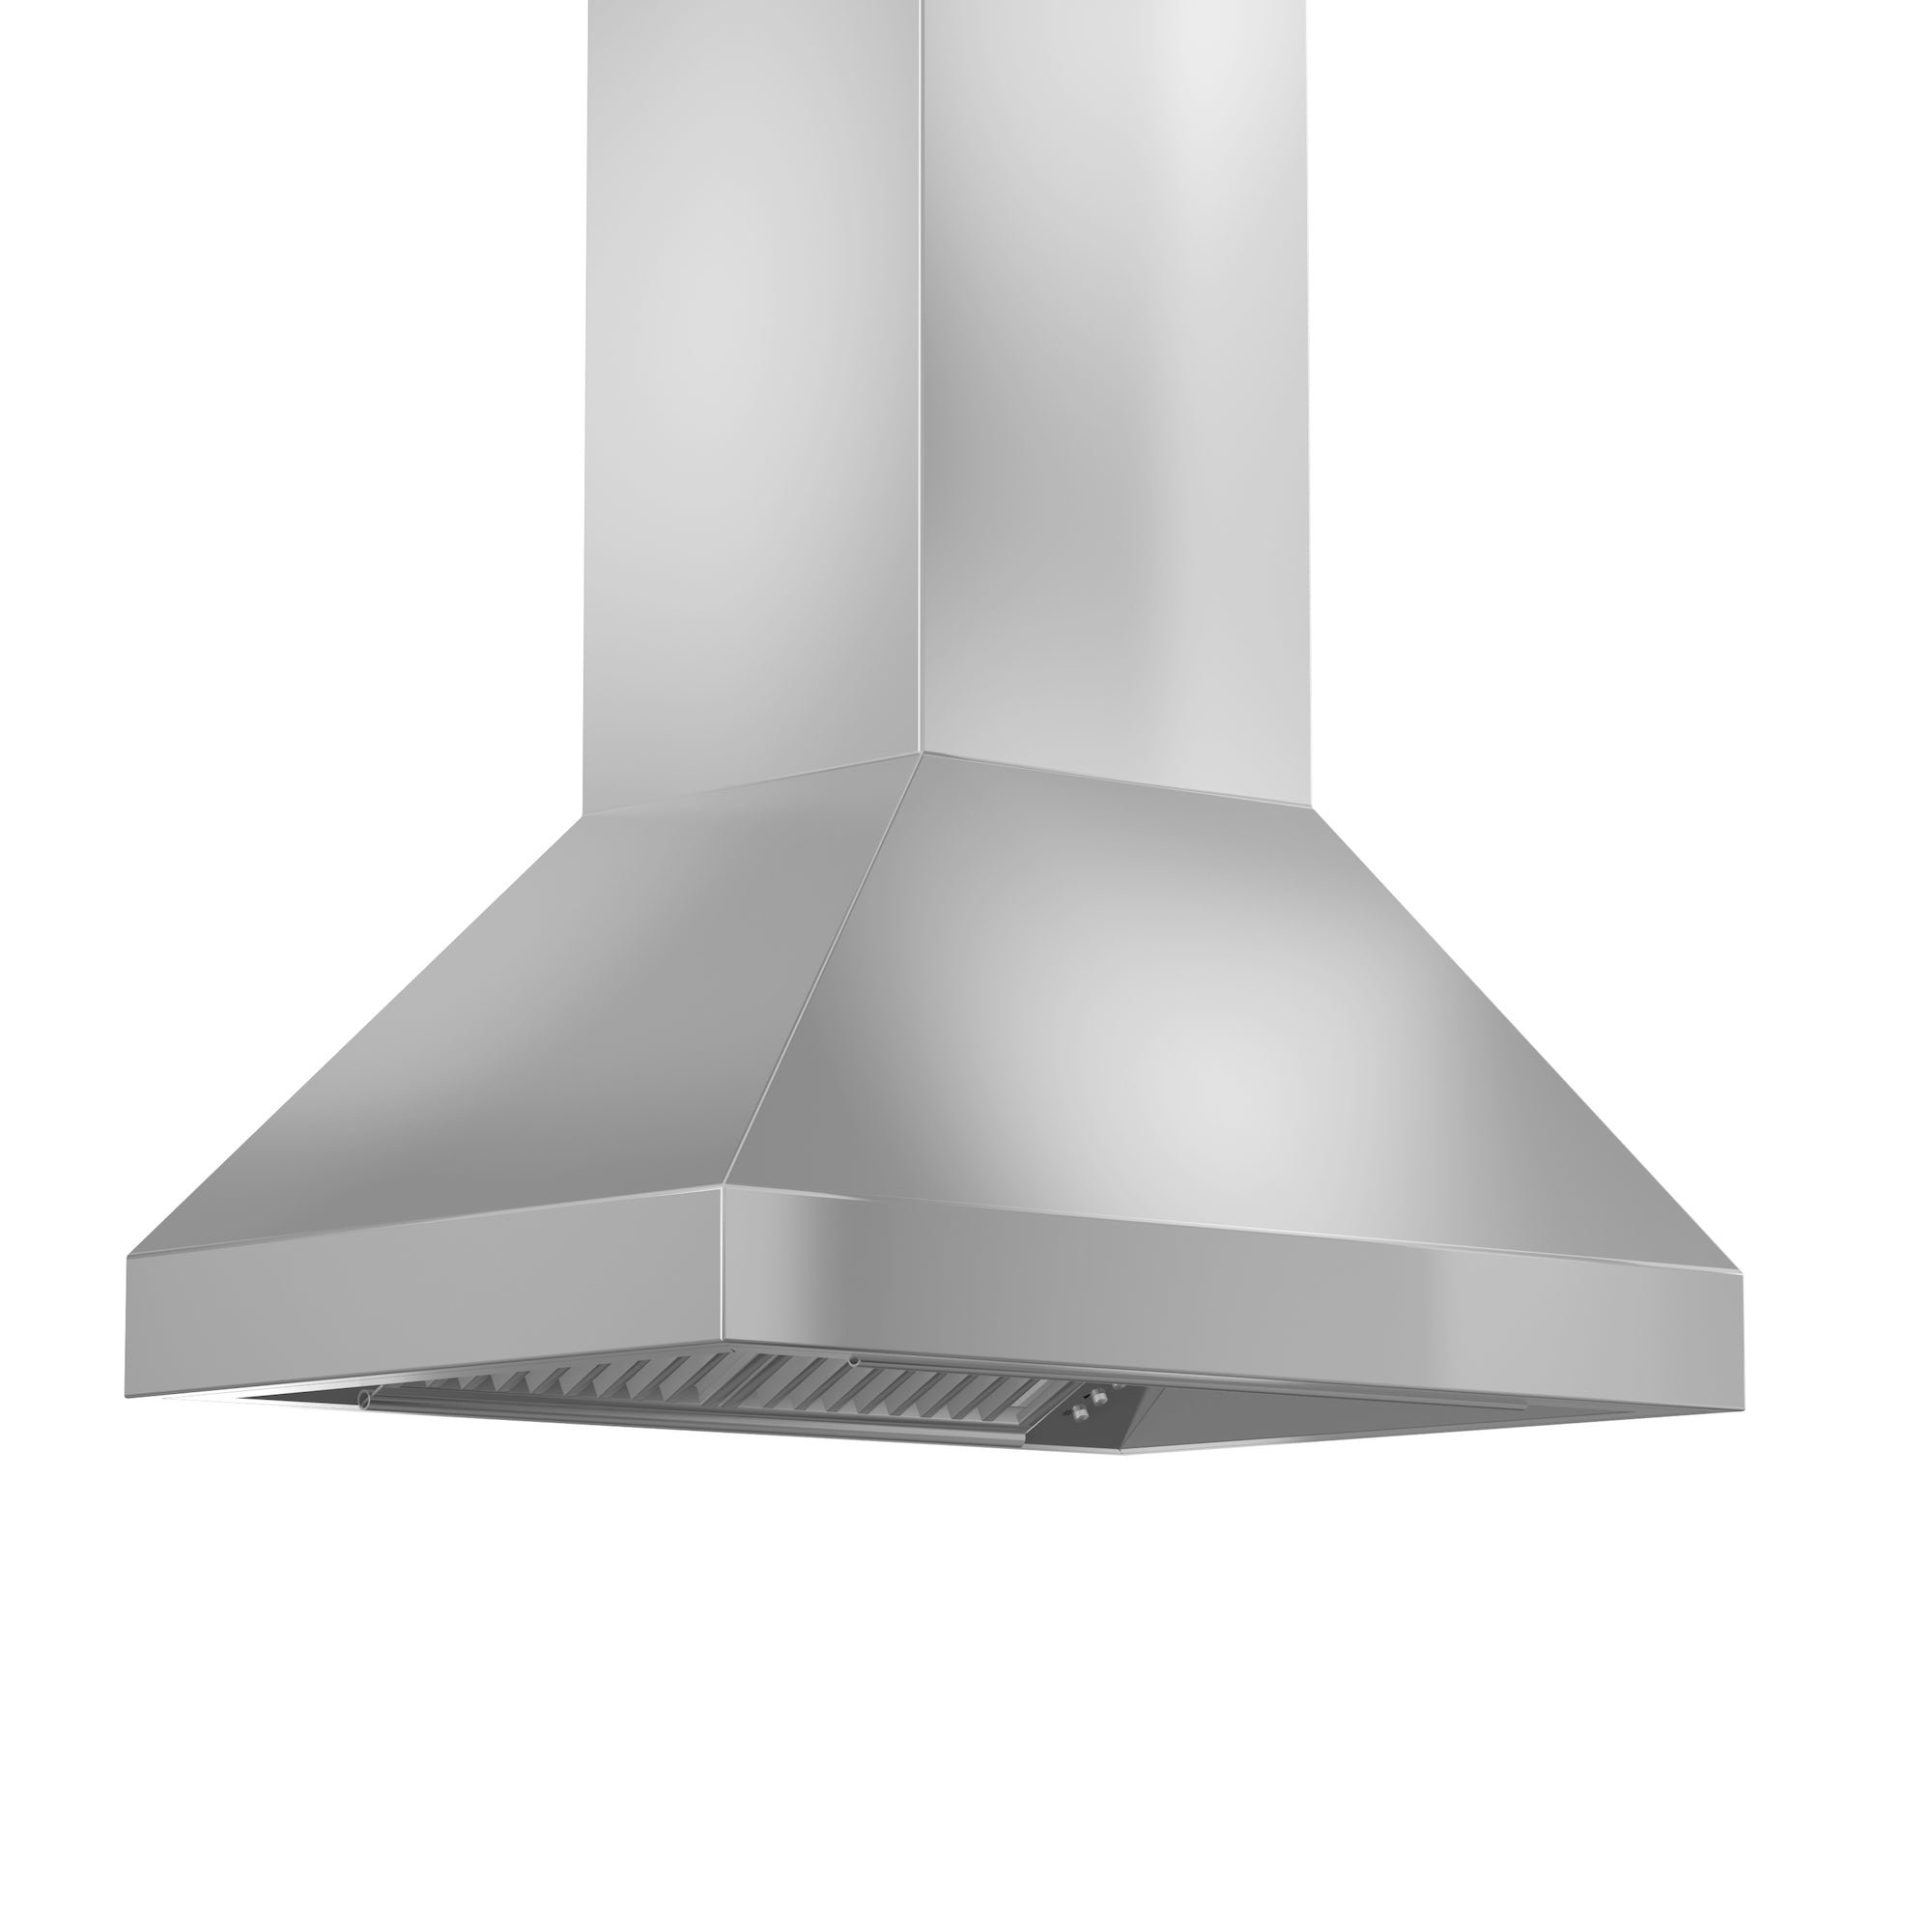 ZLINE 48" Ducted Island Mount Range Hood with Single Remote Blower in Stainless Steel (597i-RS-48-400)